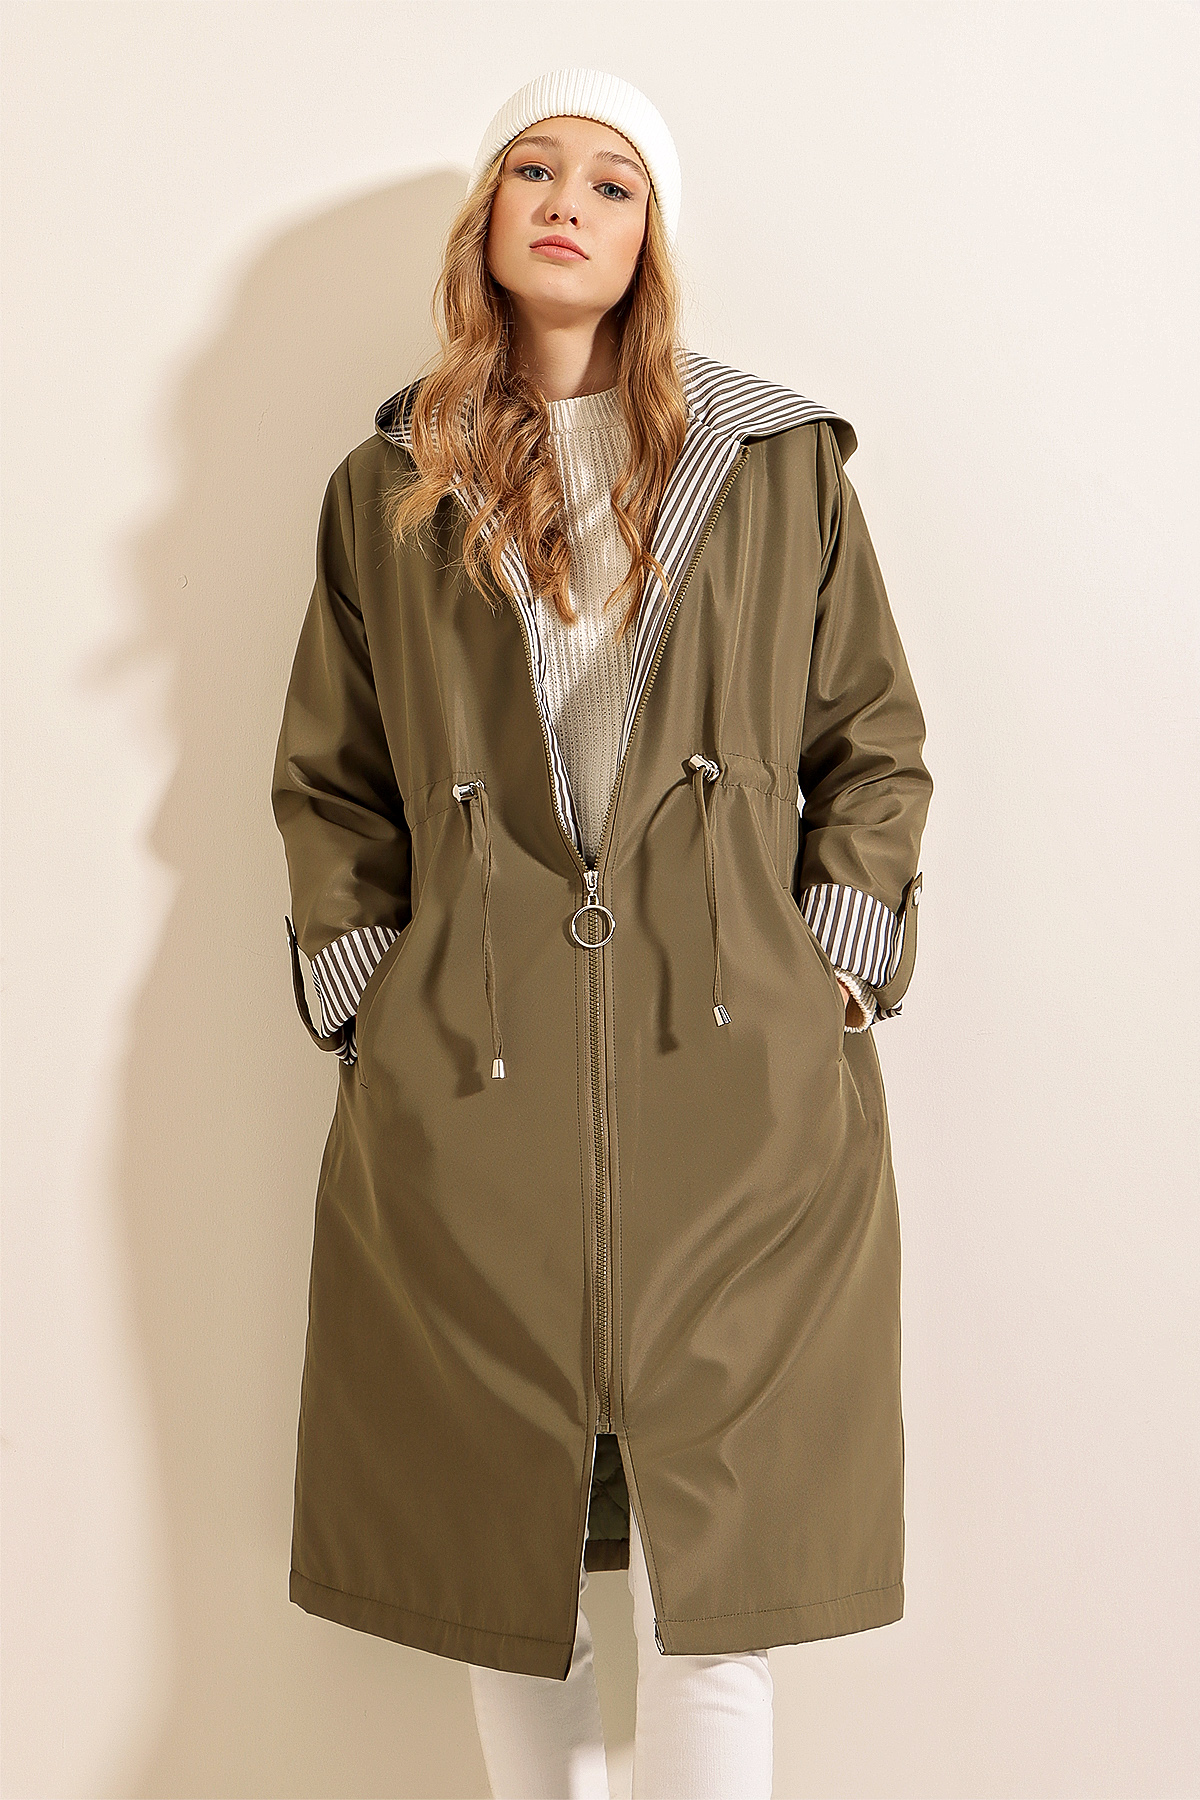 A model wears 46832 - Trench Coat - Khaki, wholesale Trenchcoat of Bigdart to display at Lonca